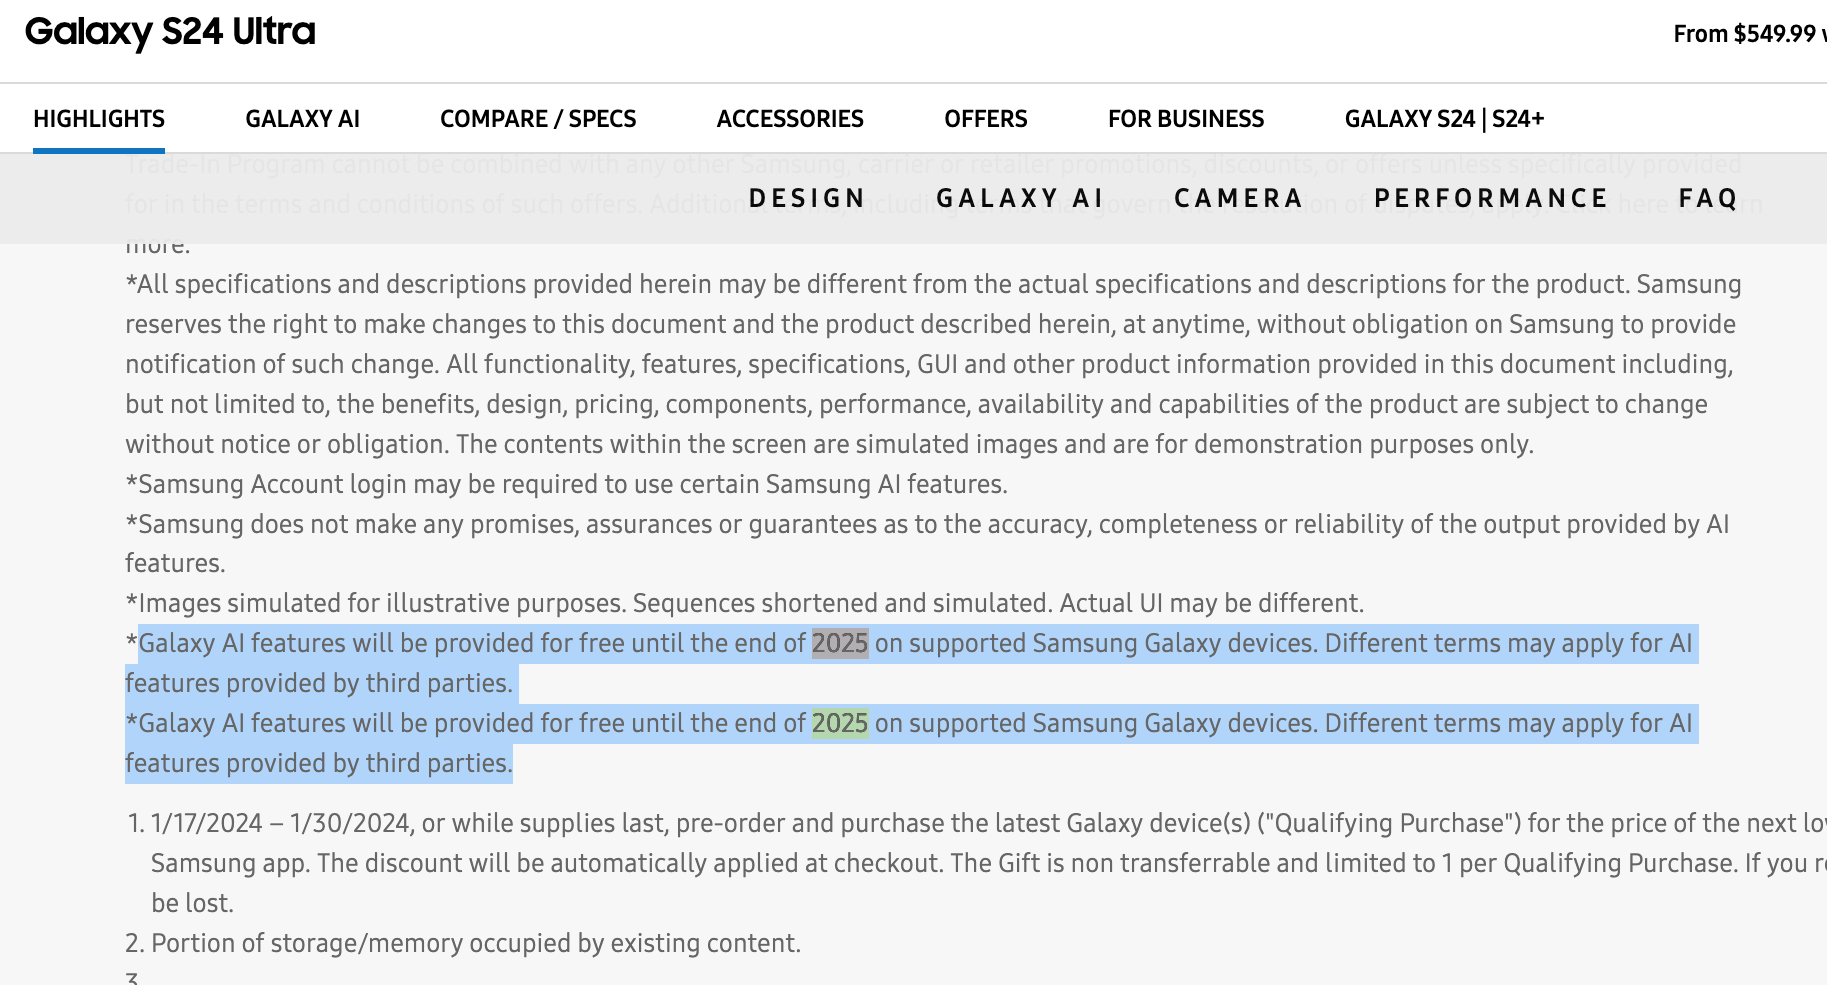 Samsung AI undisclosed pricing terms for Galaxy S24 series phones.